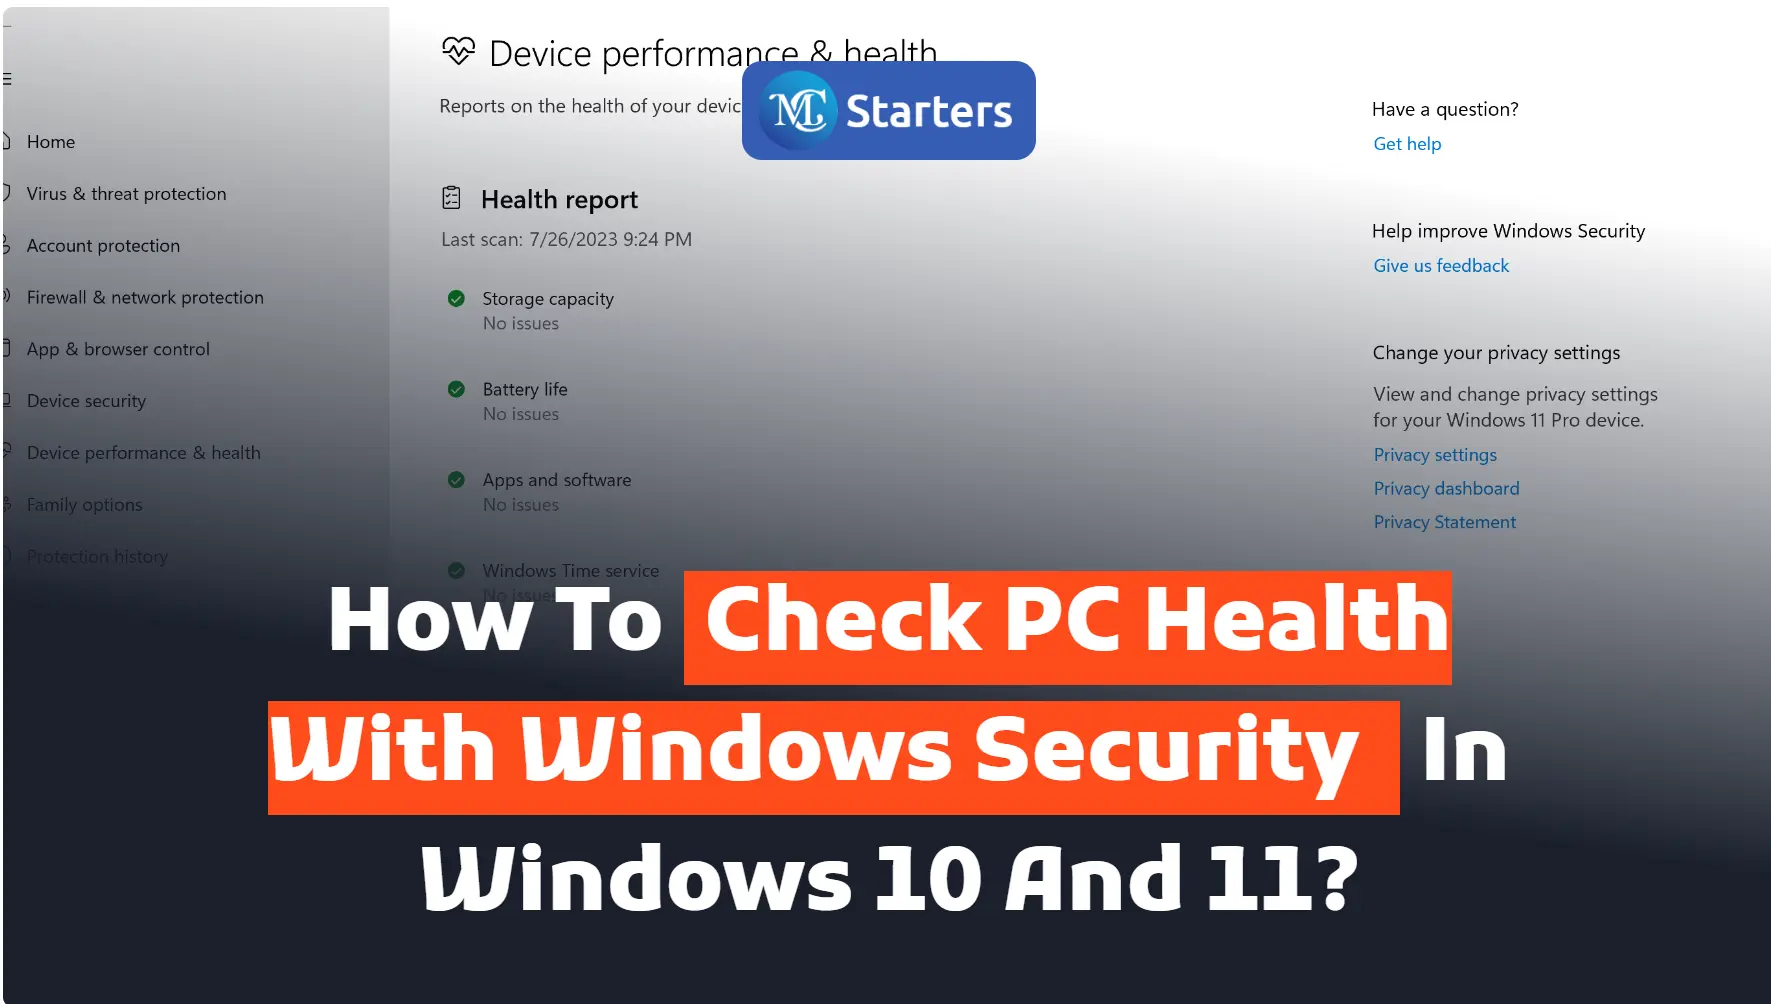 How to Check PC Health with Windows Security in Windows 10 and 11?